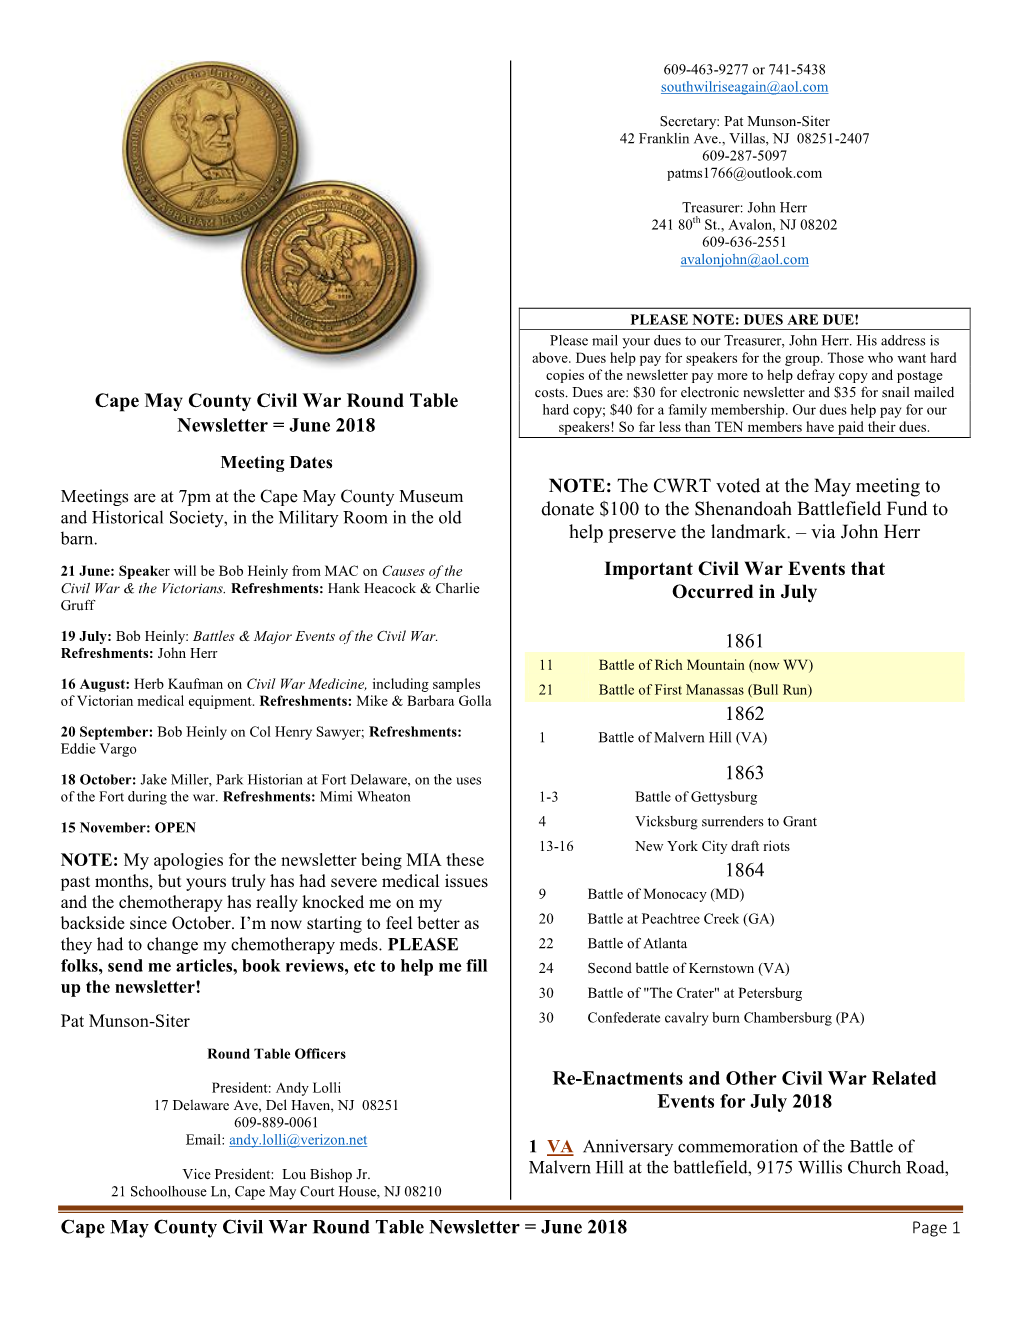 Cape May County Civil War Round Table Newsletter = June 2018 Page 1 Near Richmond